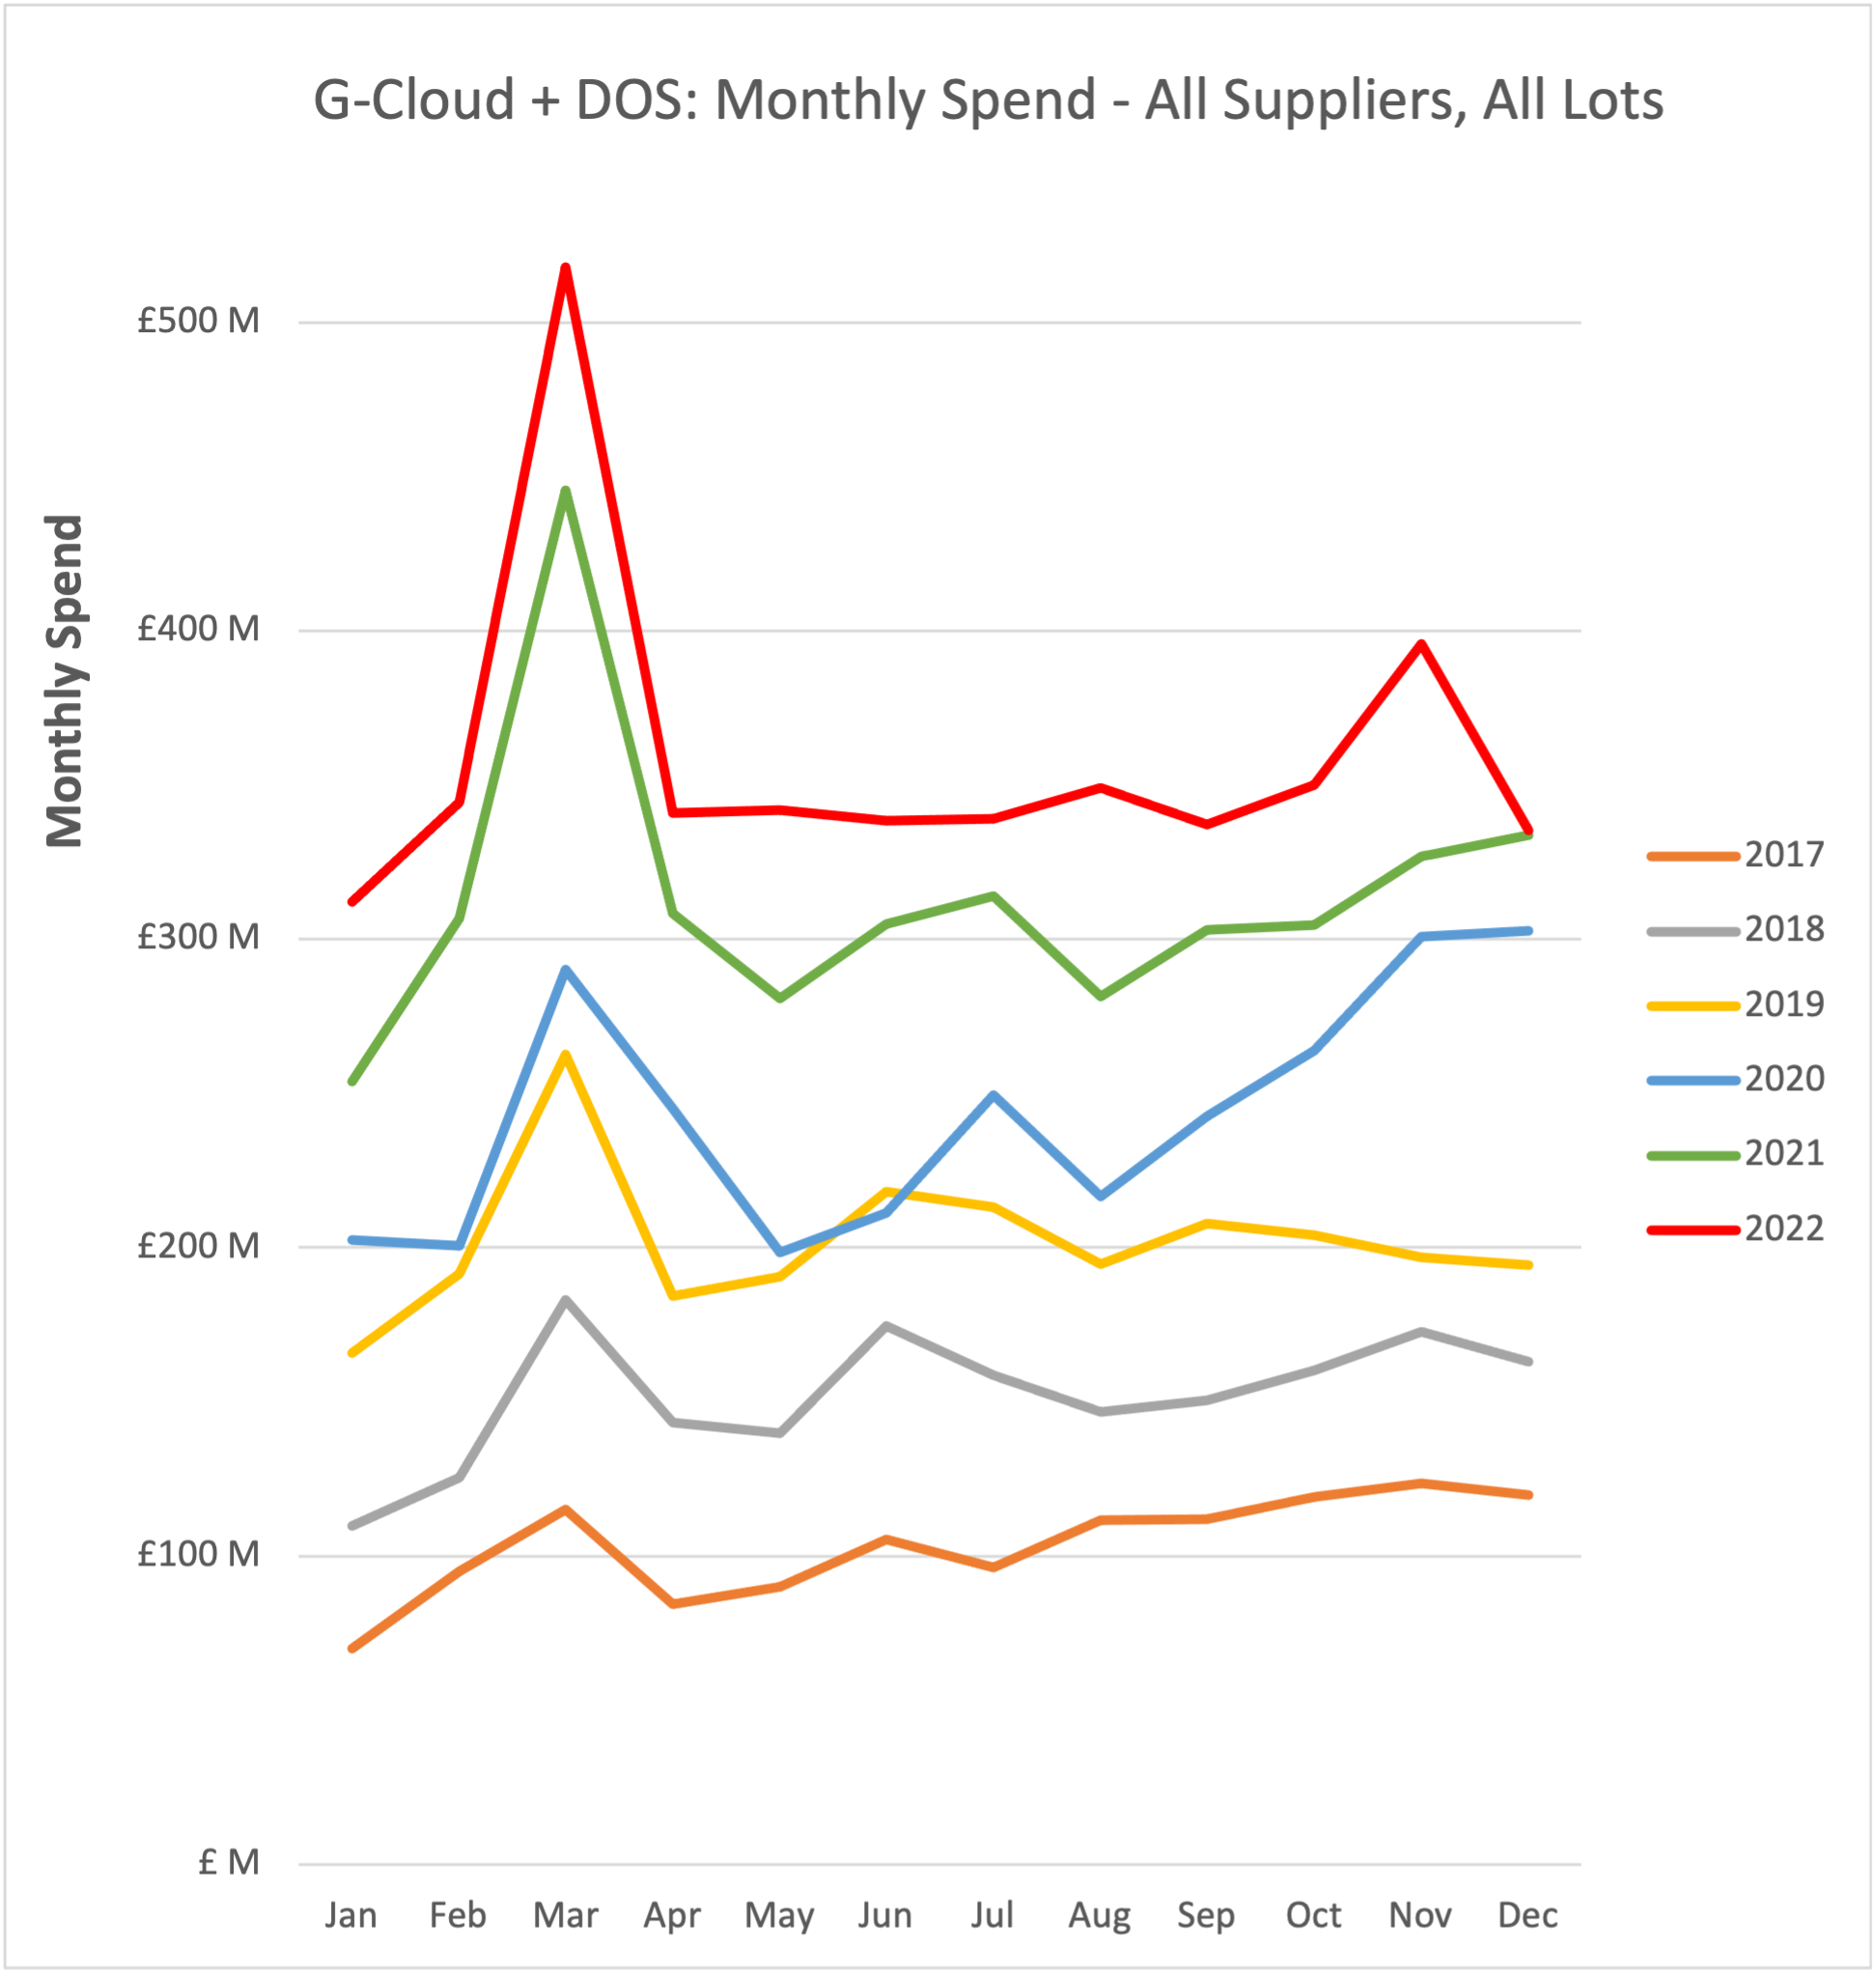 G-Cloud and DOS Monthly Spend All Suppliers All Lots Dec 2022